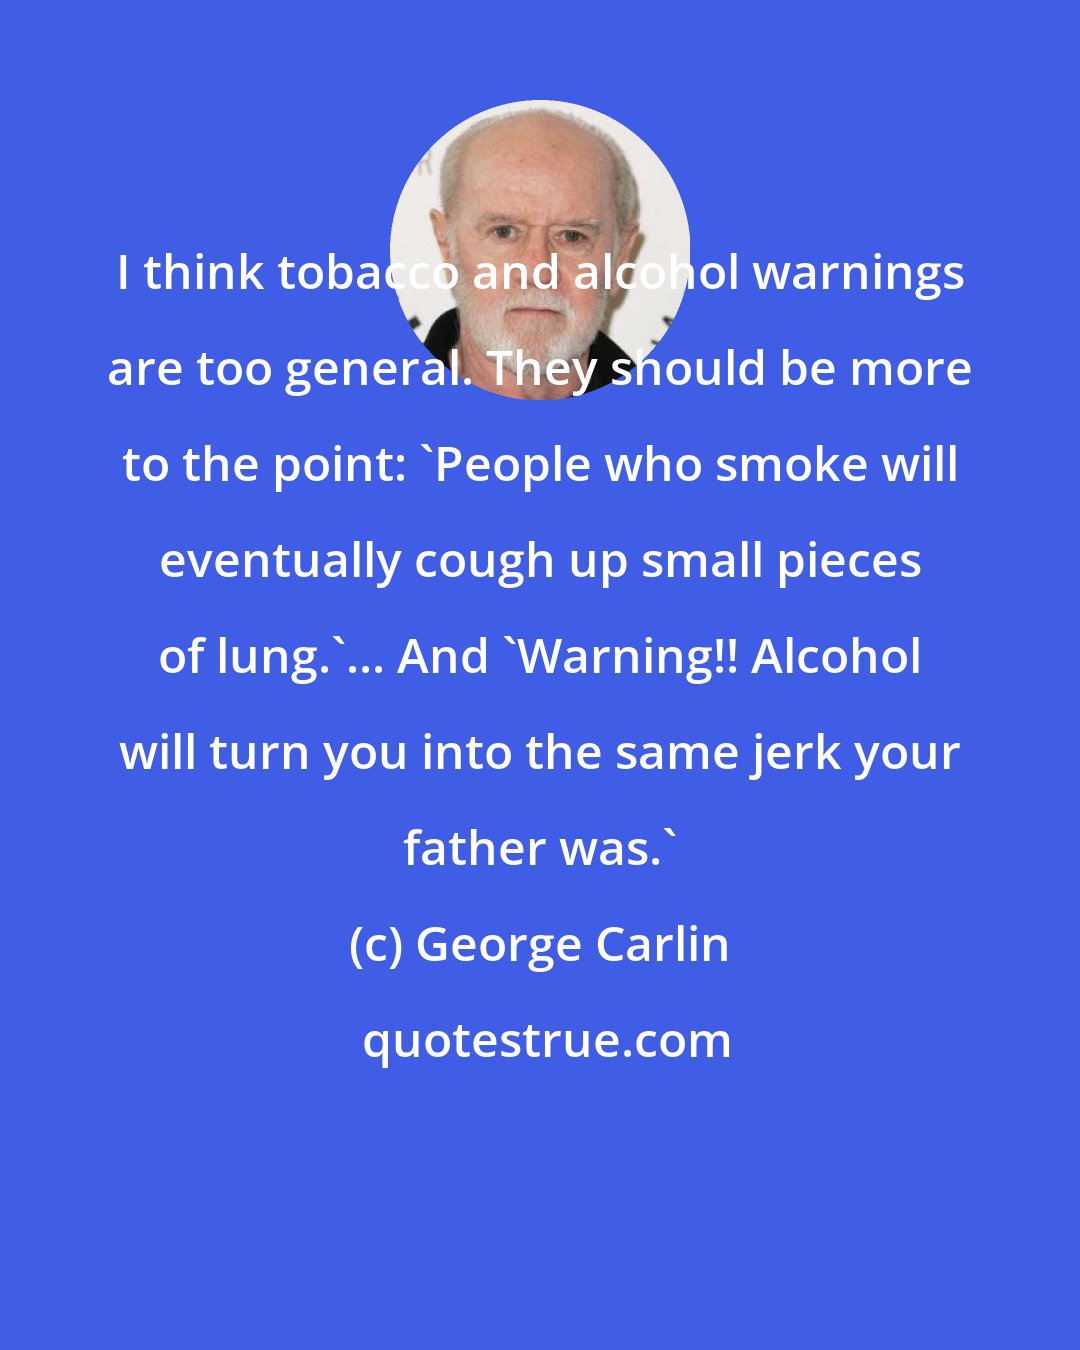 George Carlin: I think tobacco and alcohol warnings are too general. They should be more to the point: 'People who smoke will eventually cough up small pieces of lung.'... And 'Warning!! Alcohol will turn you into the same jerk your father was.'